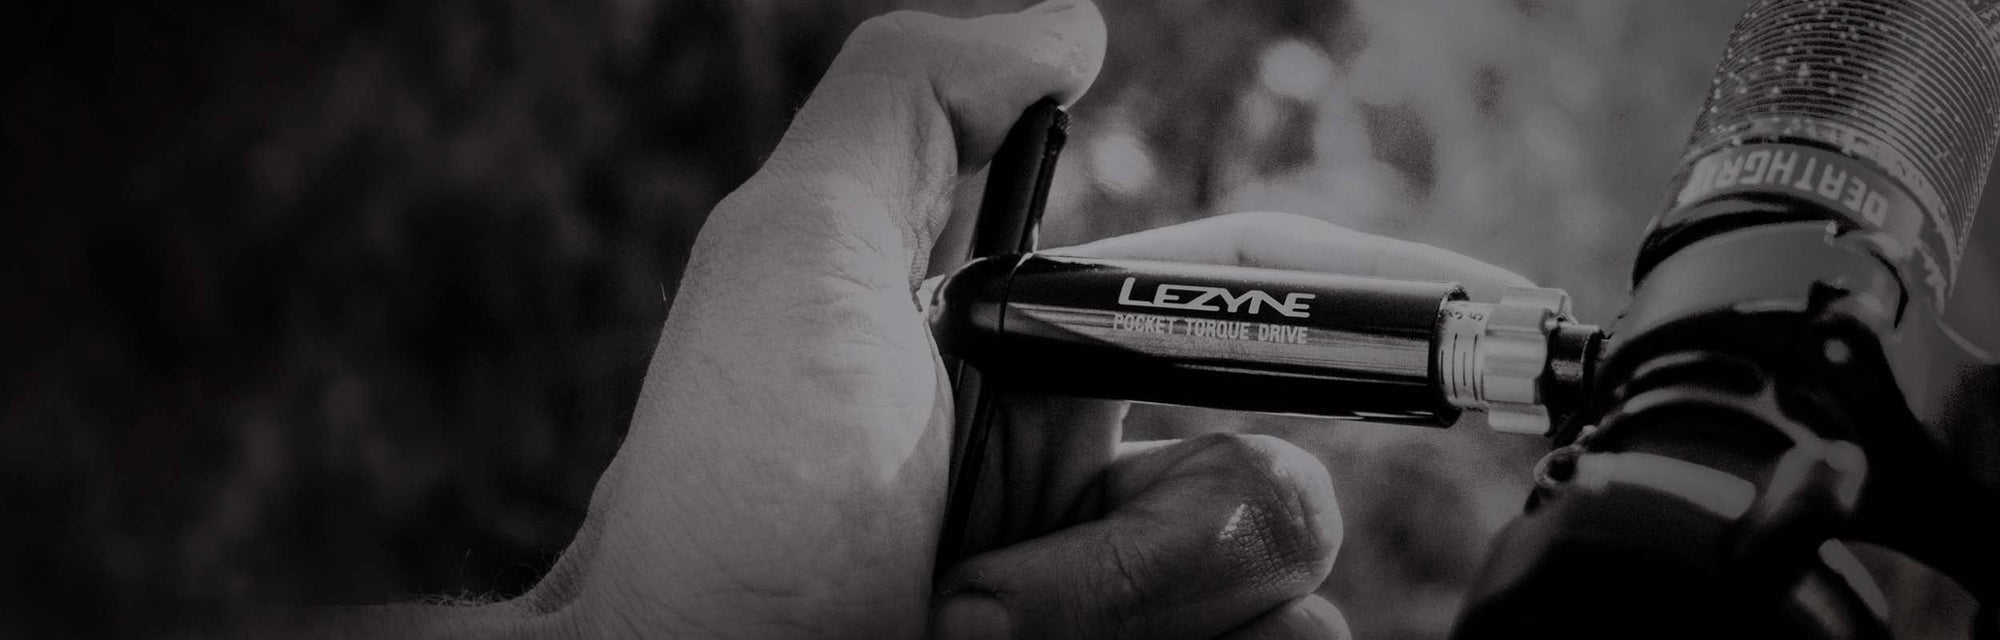 A hand holding a tool with the words Lezyne Pocket Torque Drive printed on the side.